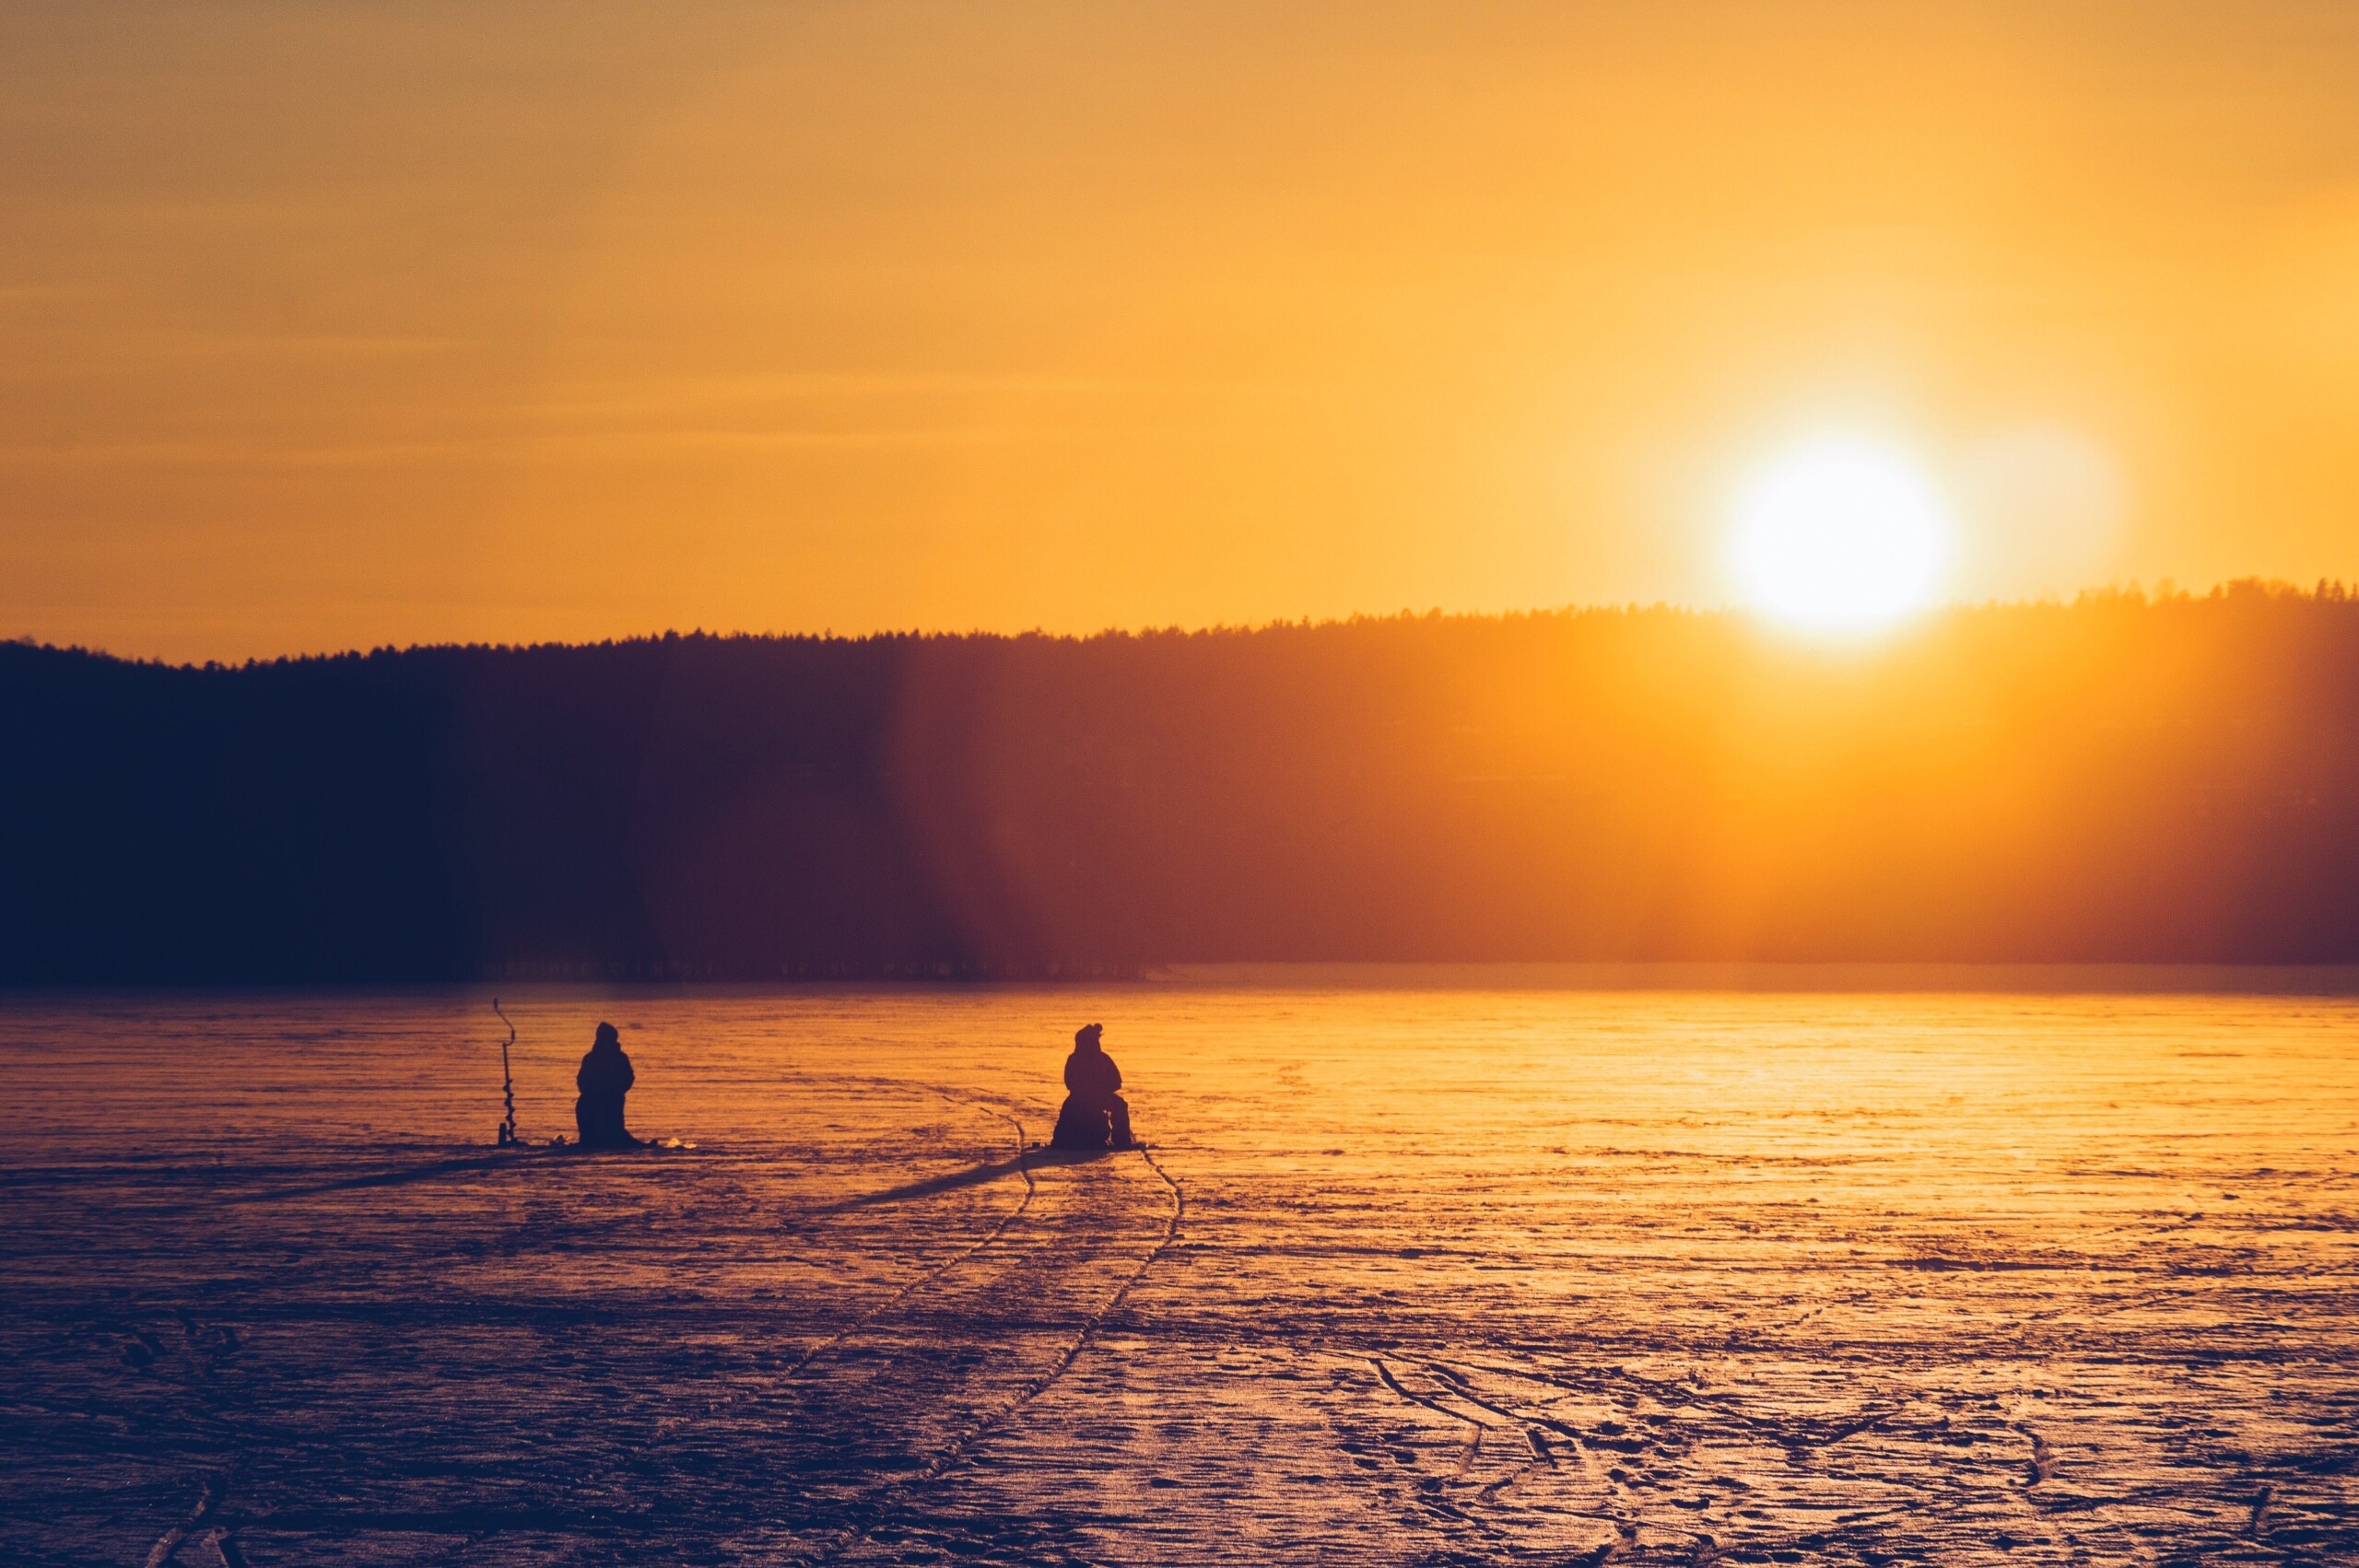 Silhouette Of Two Persons Sitting While Snow Fishing On An Iced Covered Body Of Water At Dawn